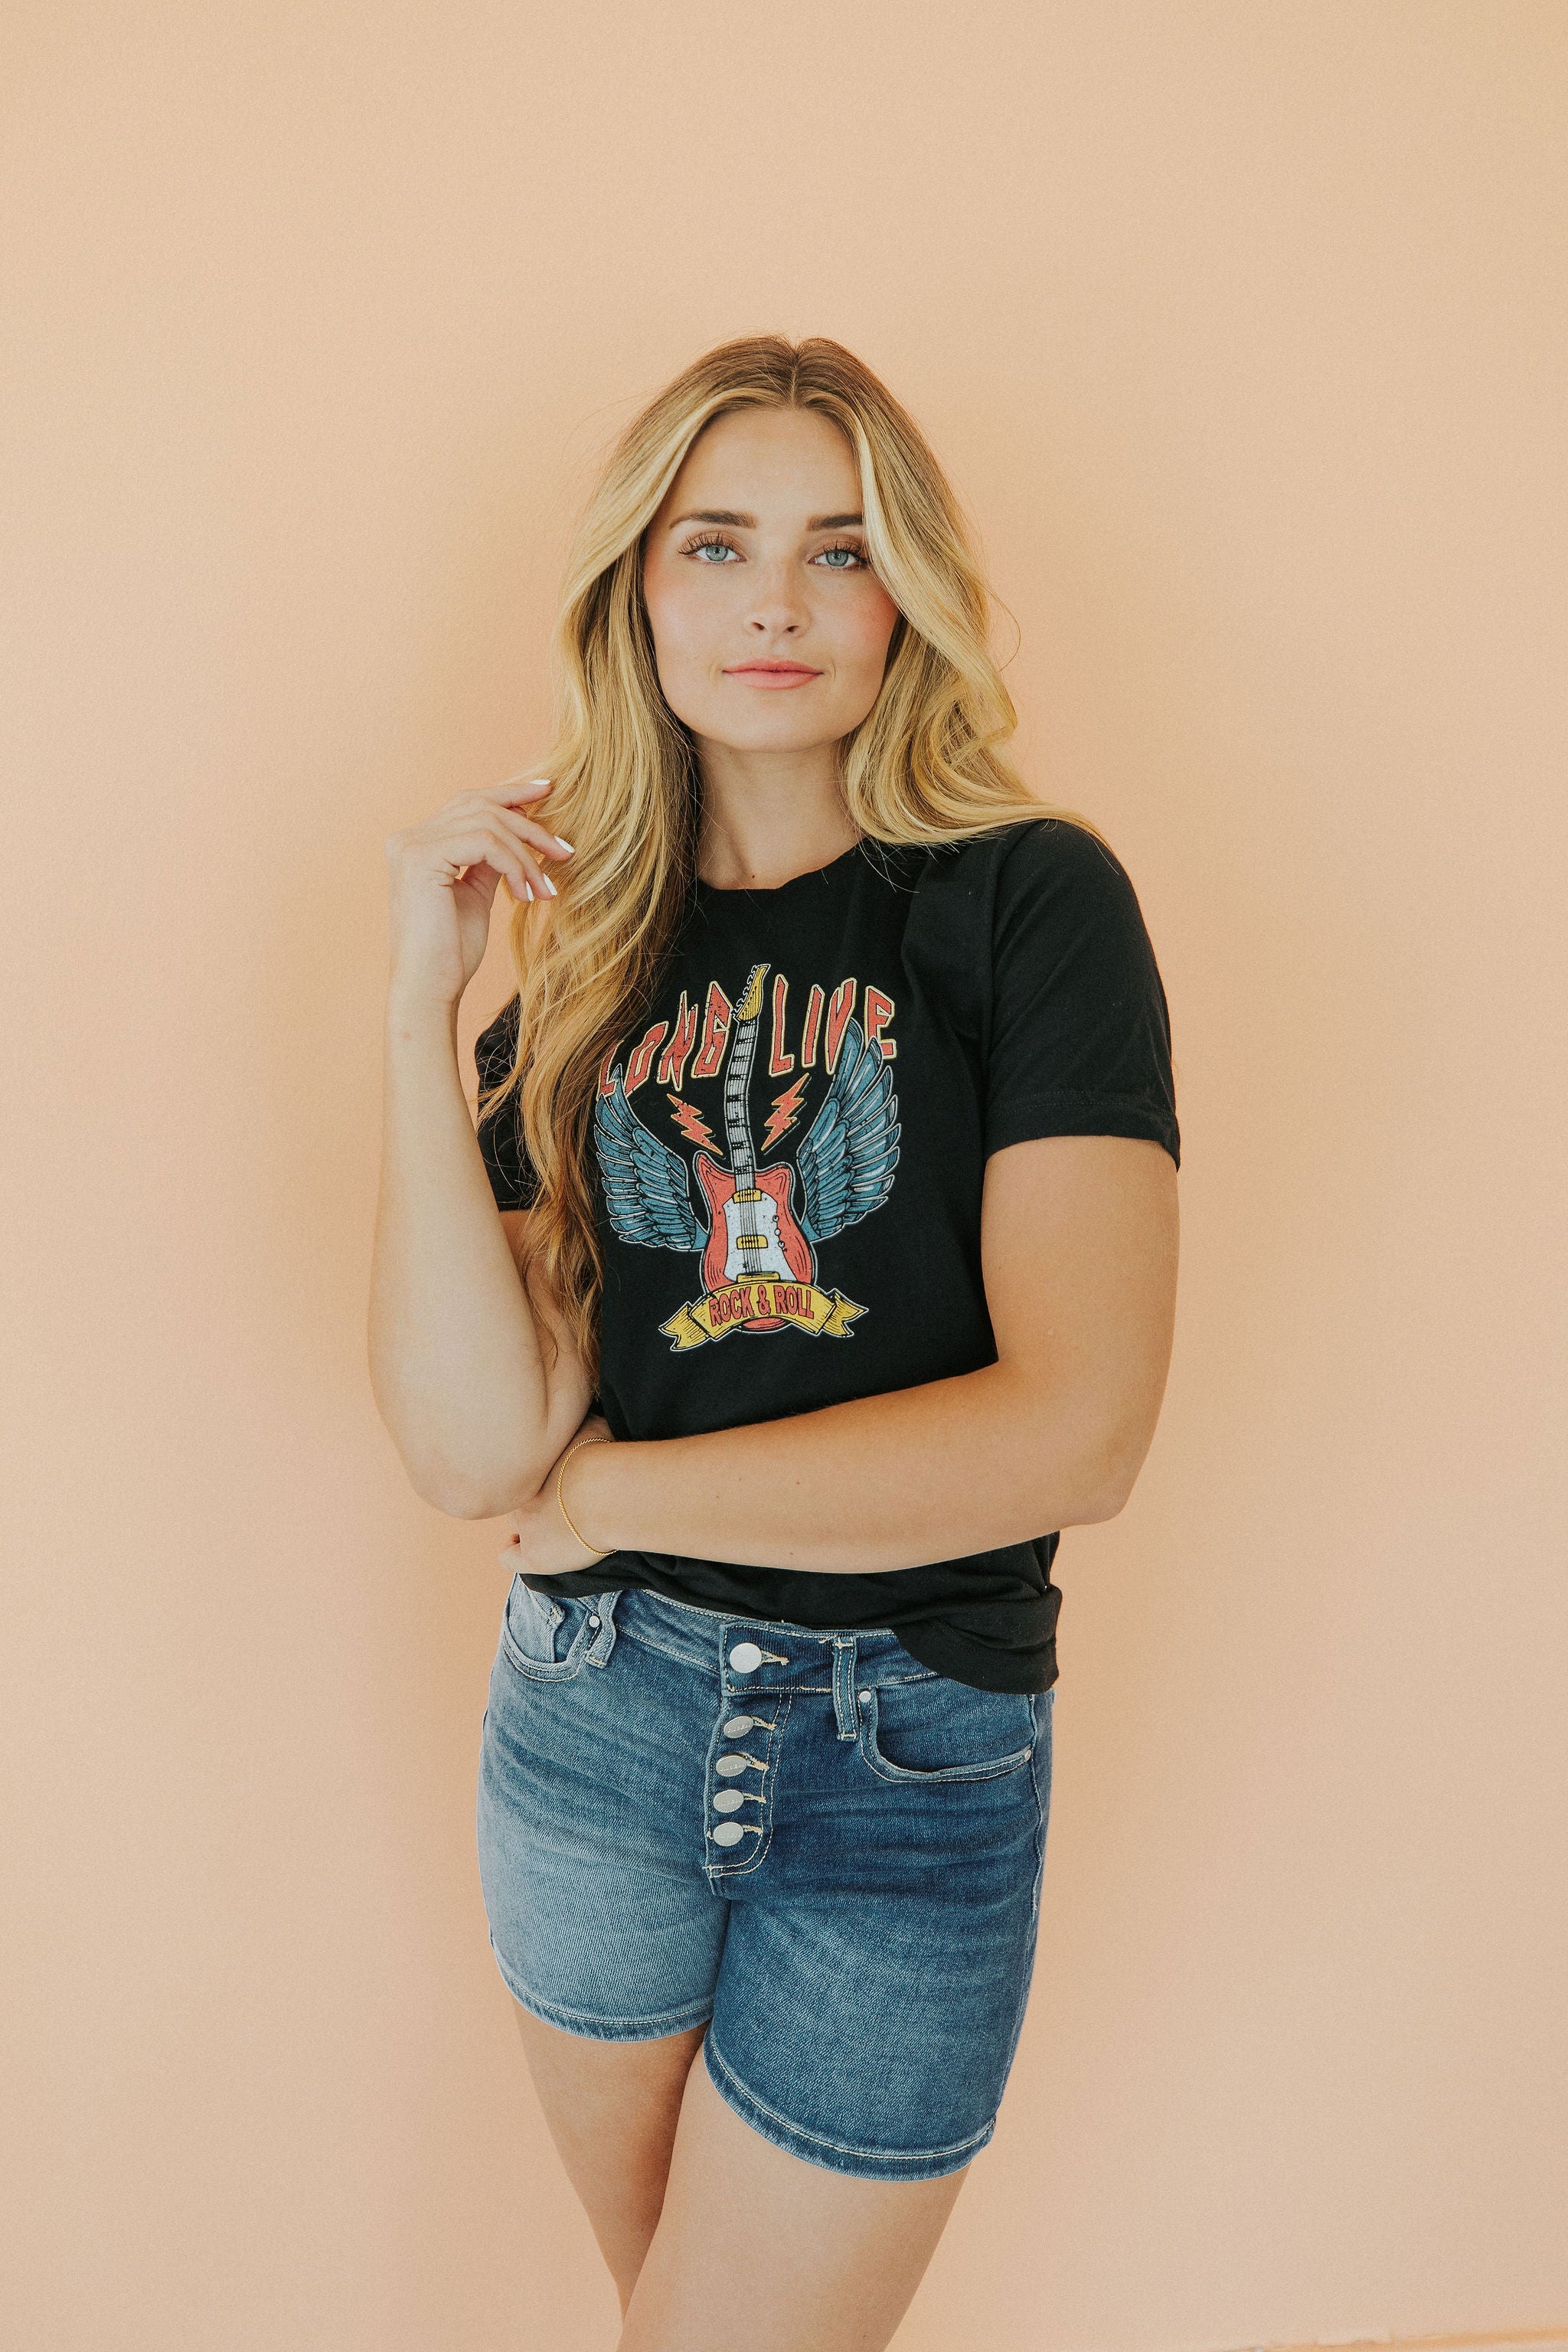 Long Live Rock N Roll Graphic Tee - Lola Cerina Boutique